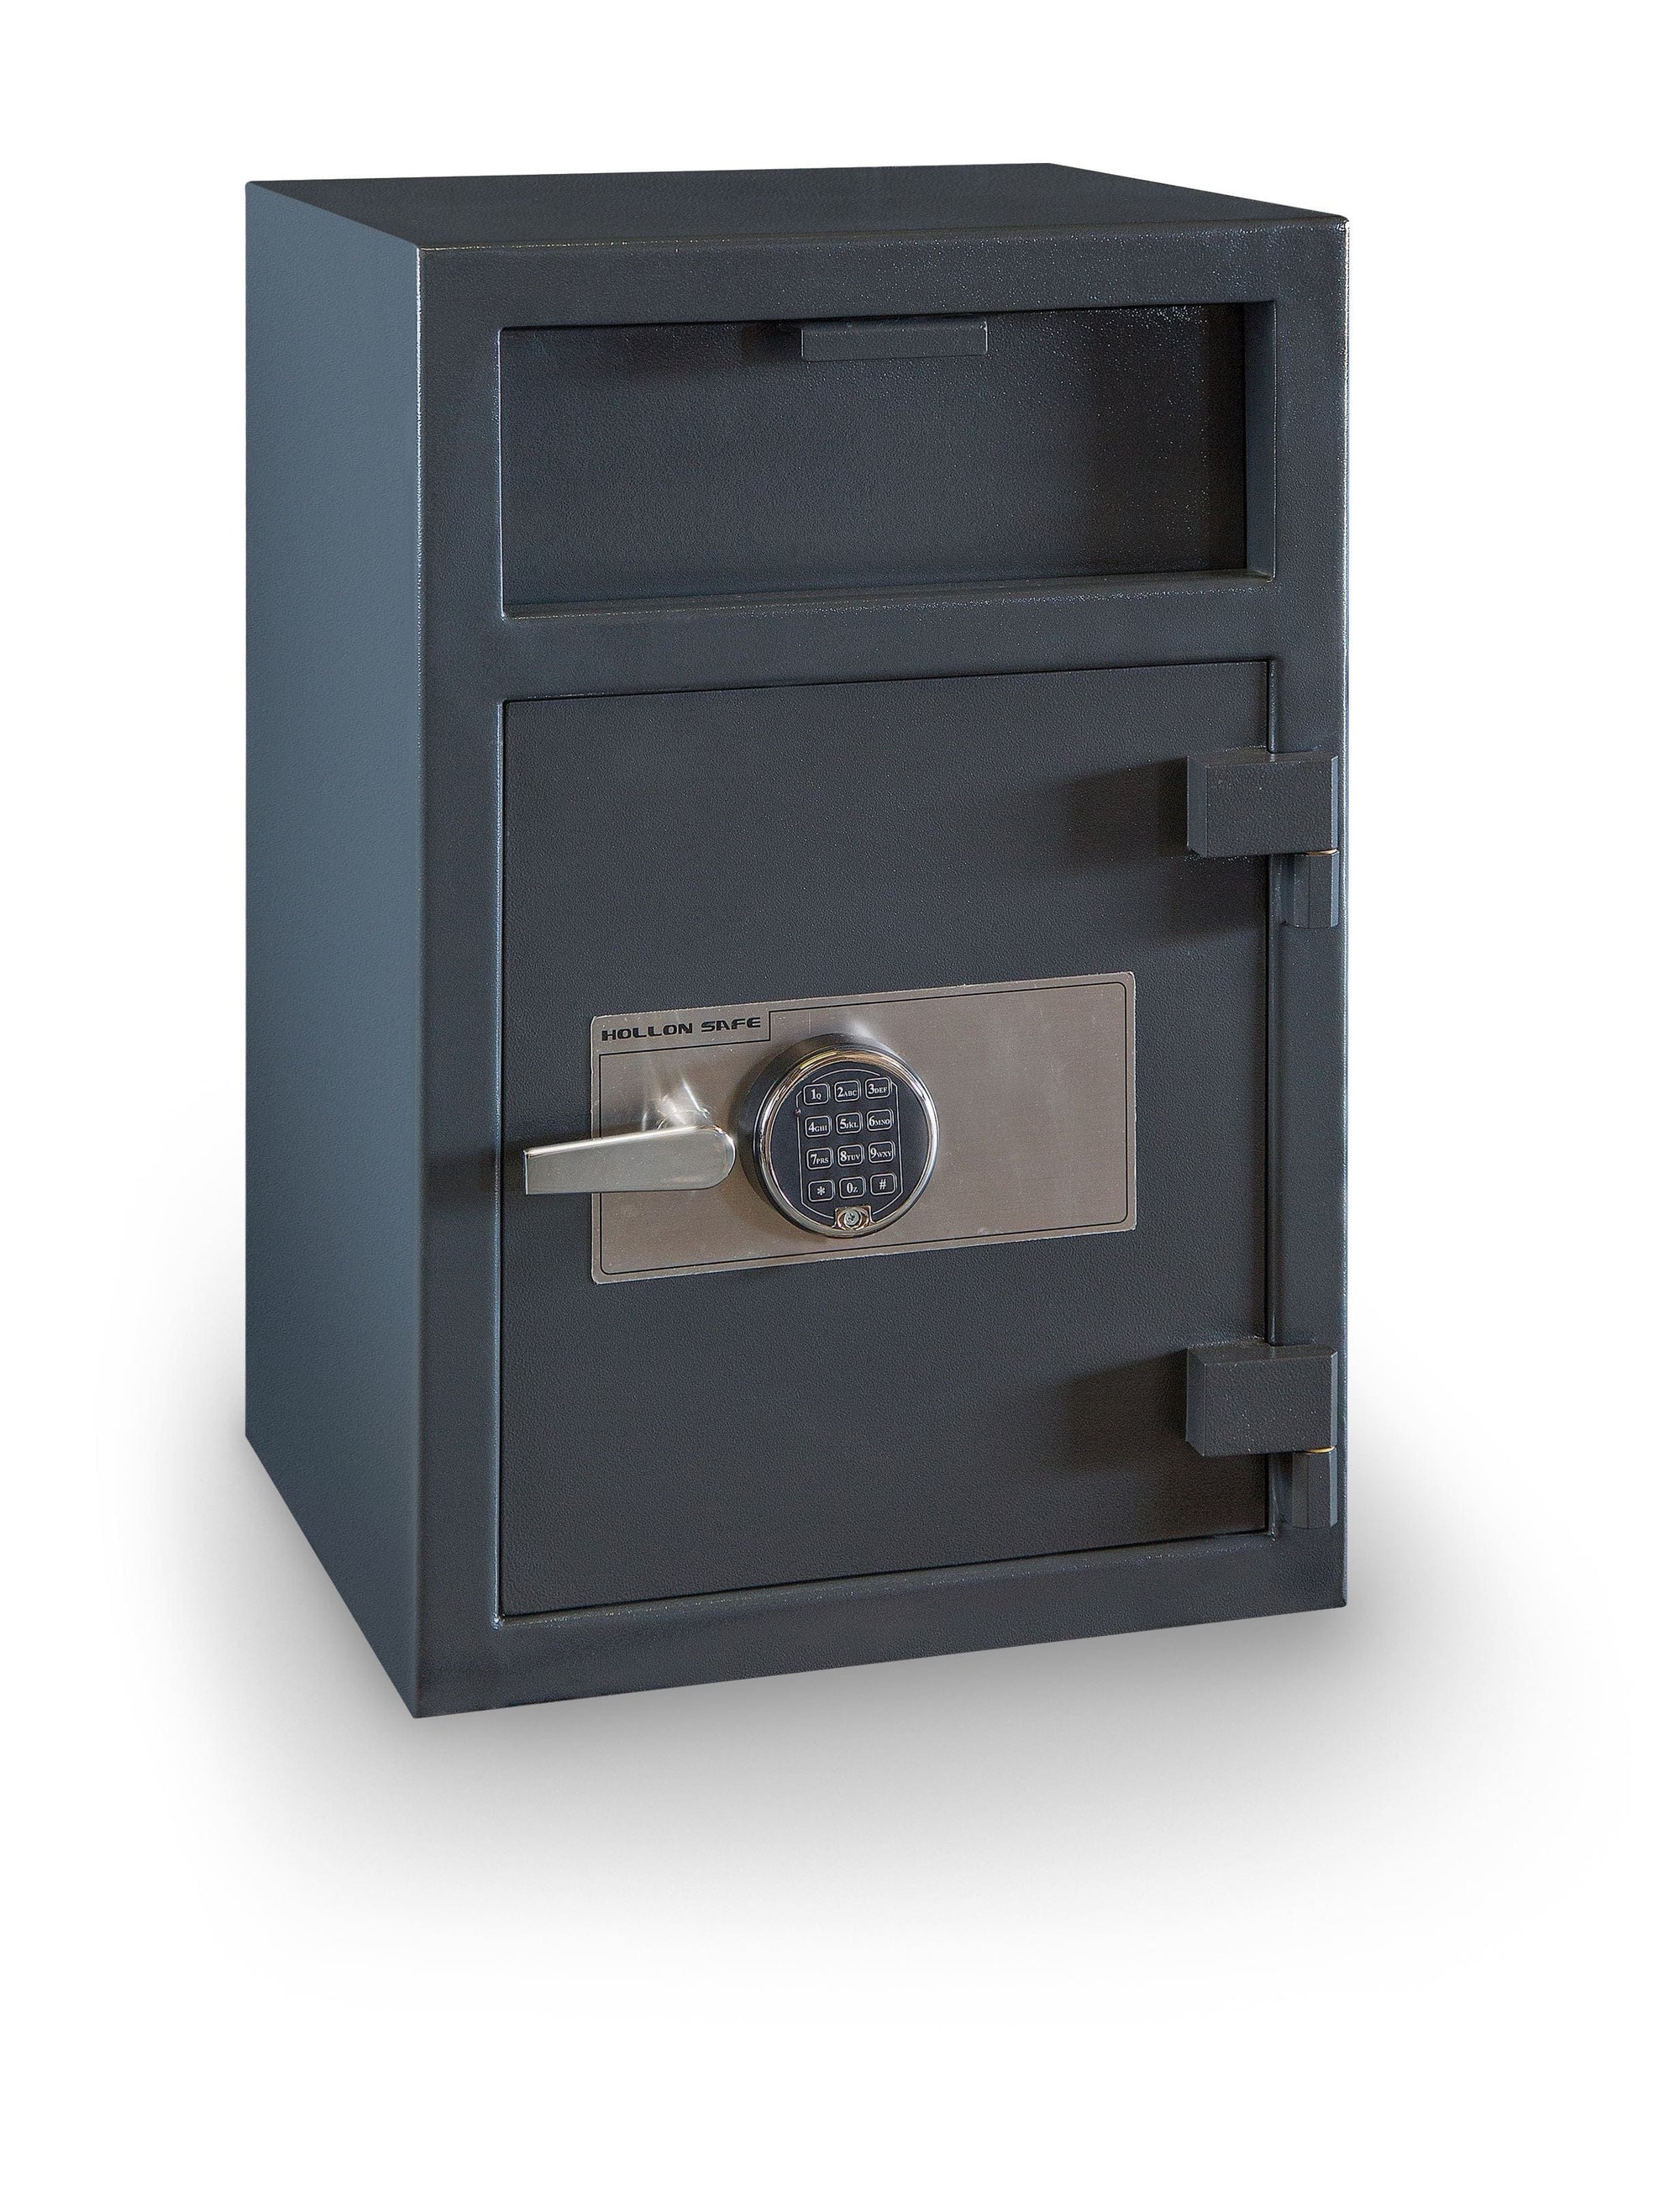 Hollon FD-3020EILK Depository Safe with Inner Locking Department Armadillo Safe and Vault